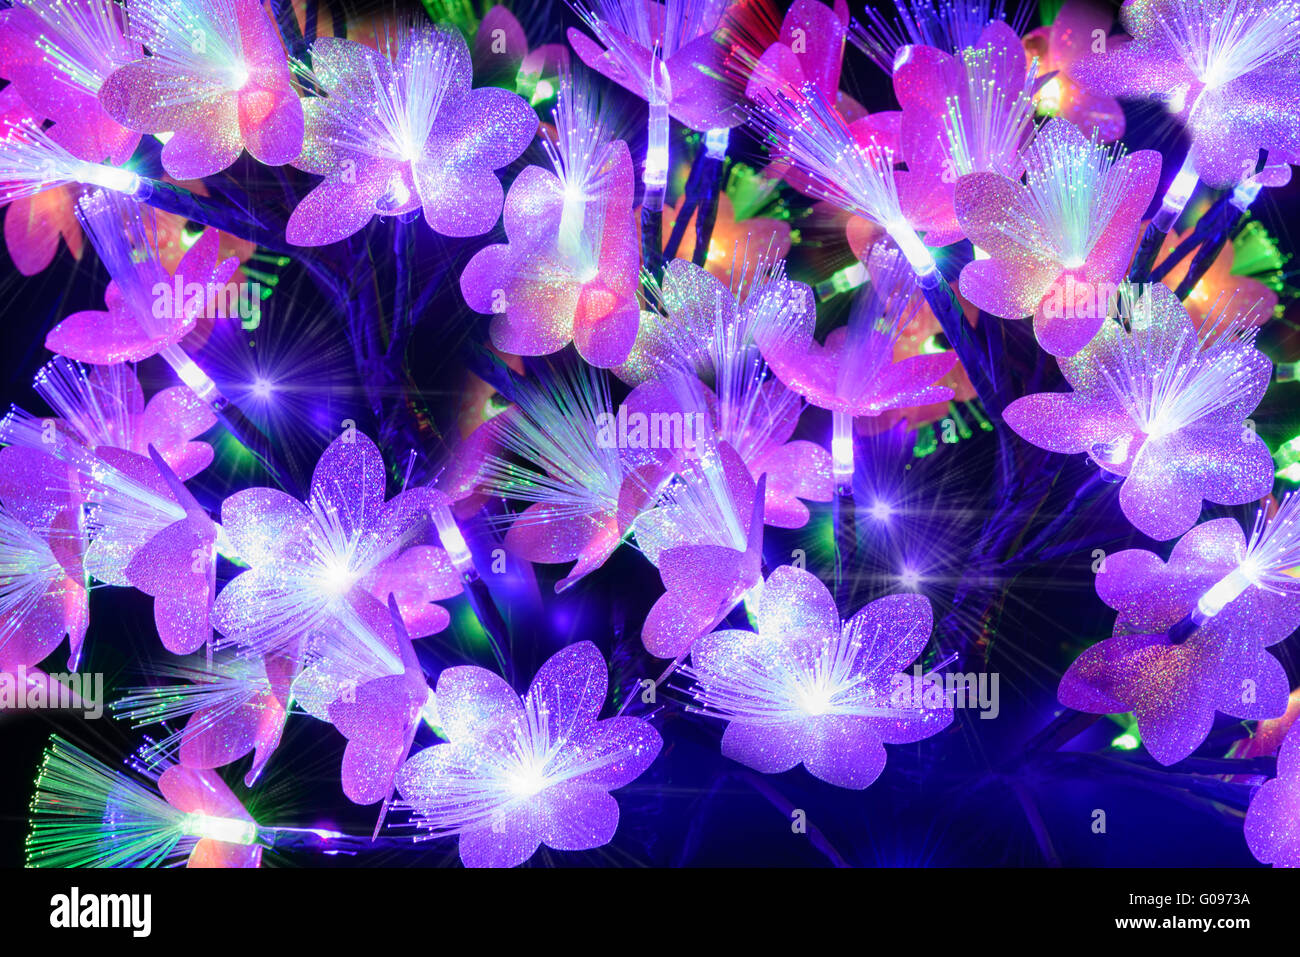 Glowing abstract flowers on a dark background Stock Photo